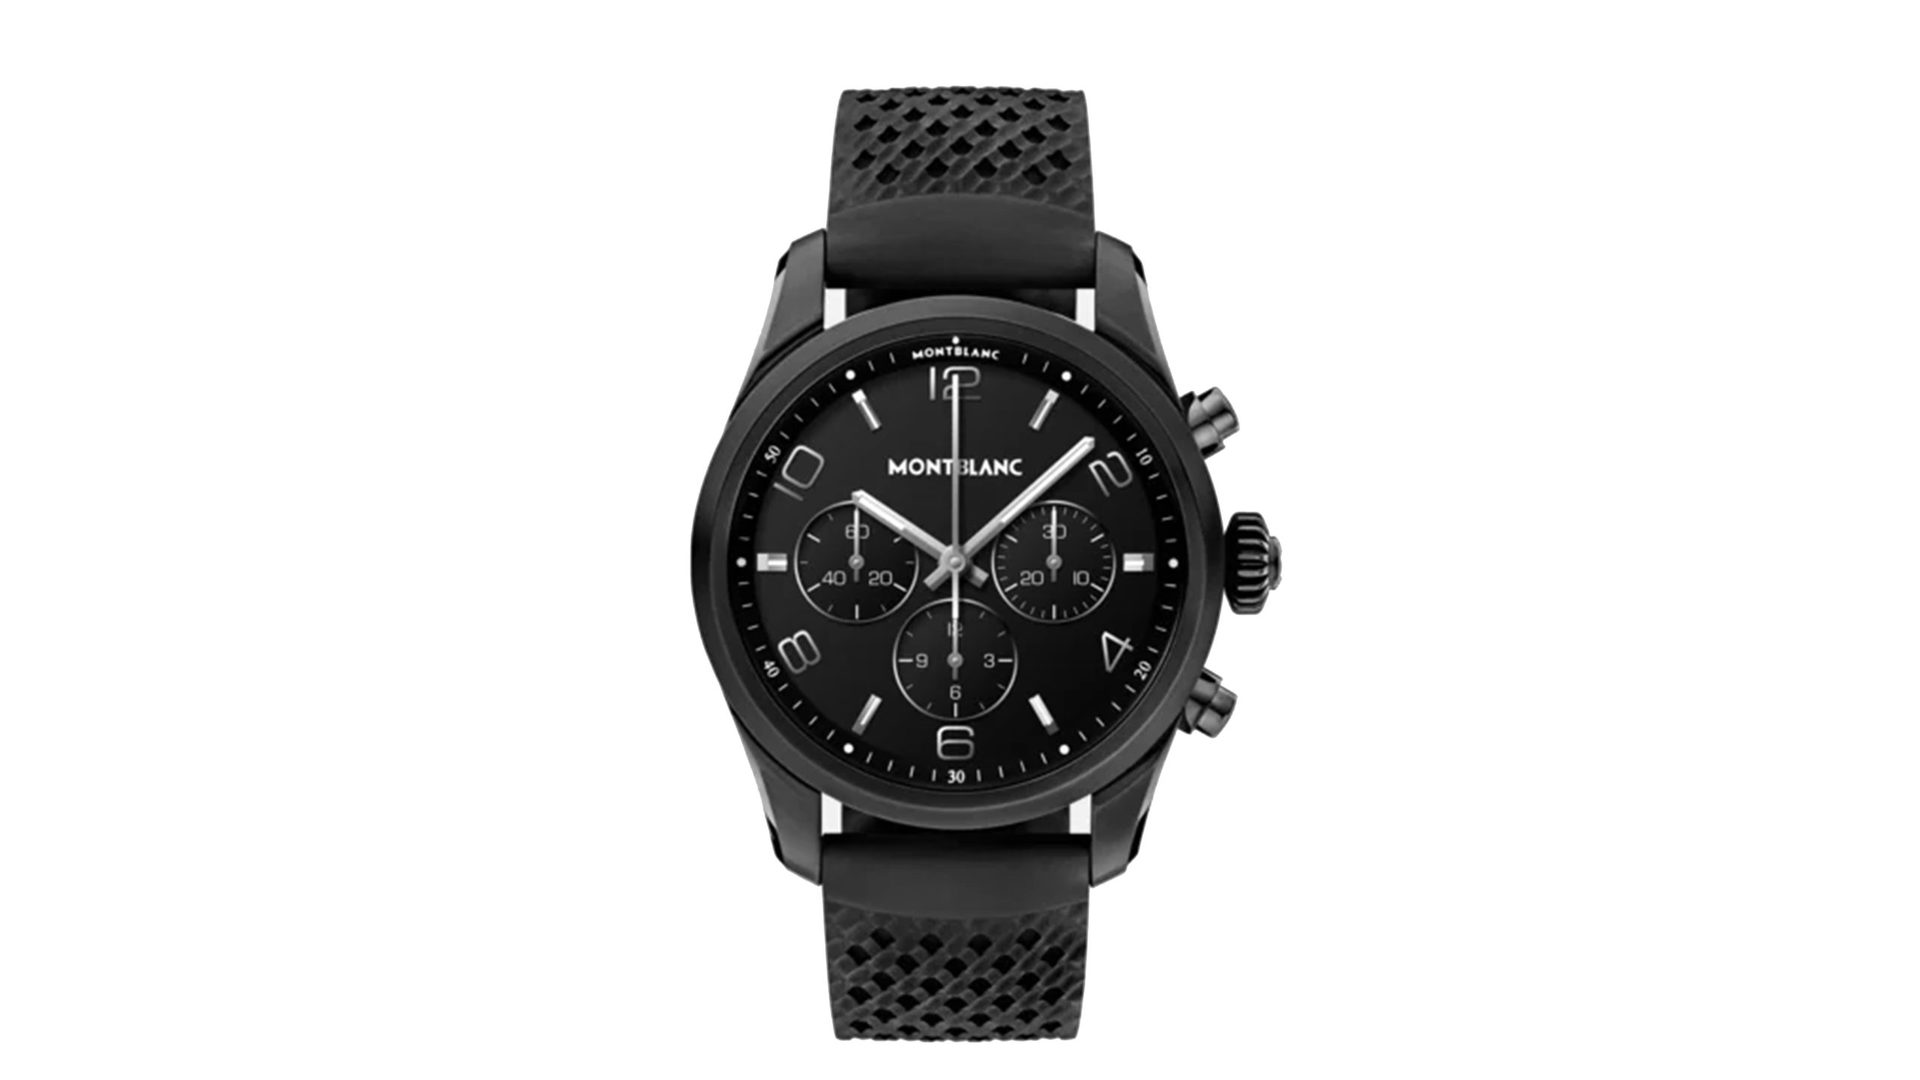 The Montblanc Summit 2 Plus in black with a rubber strap.